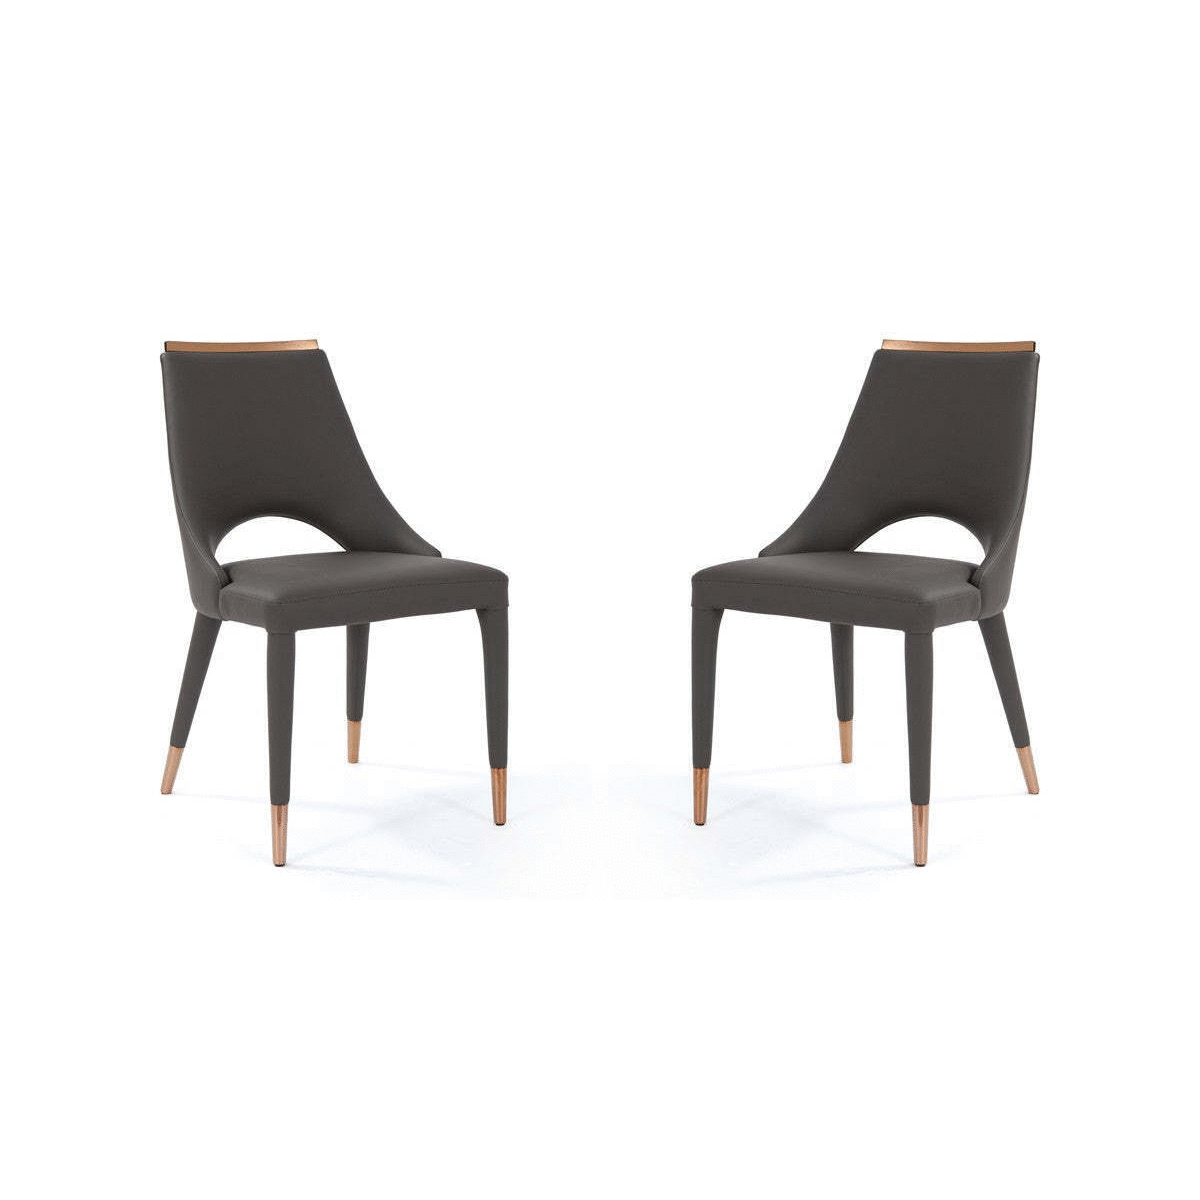 Millie Dining Chair Set of 2